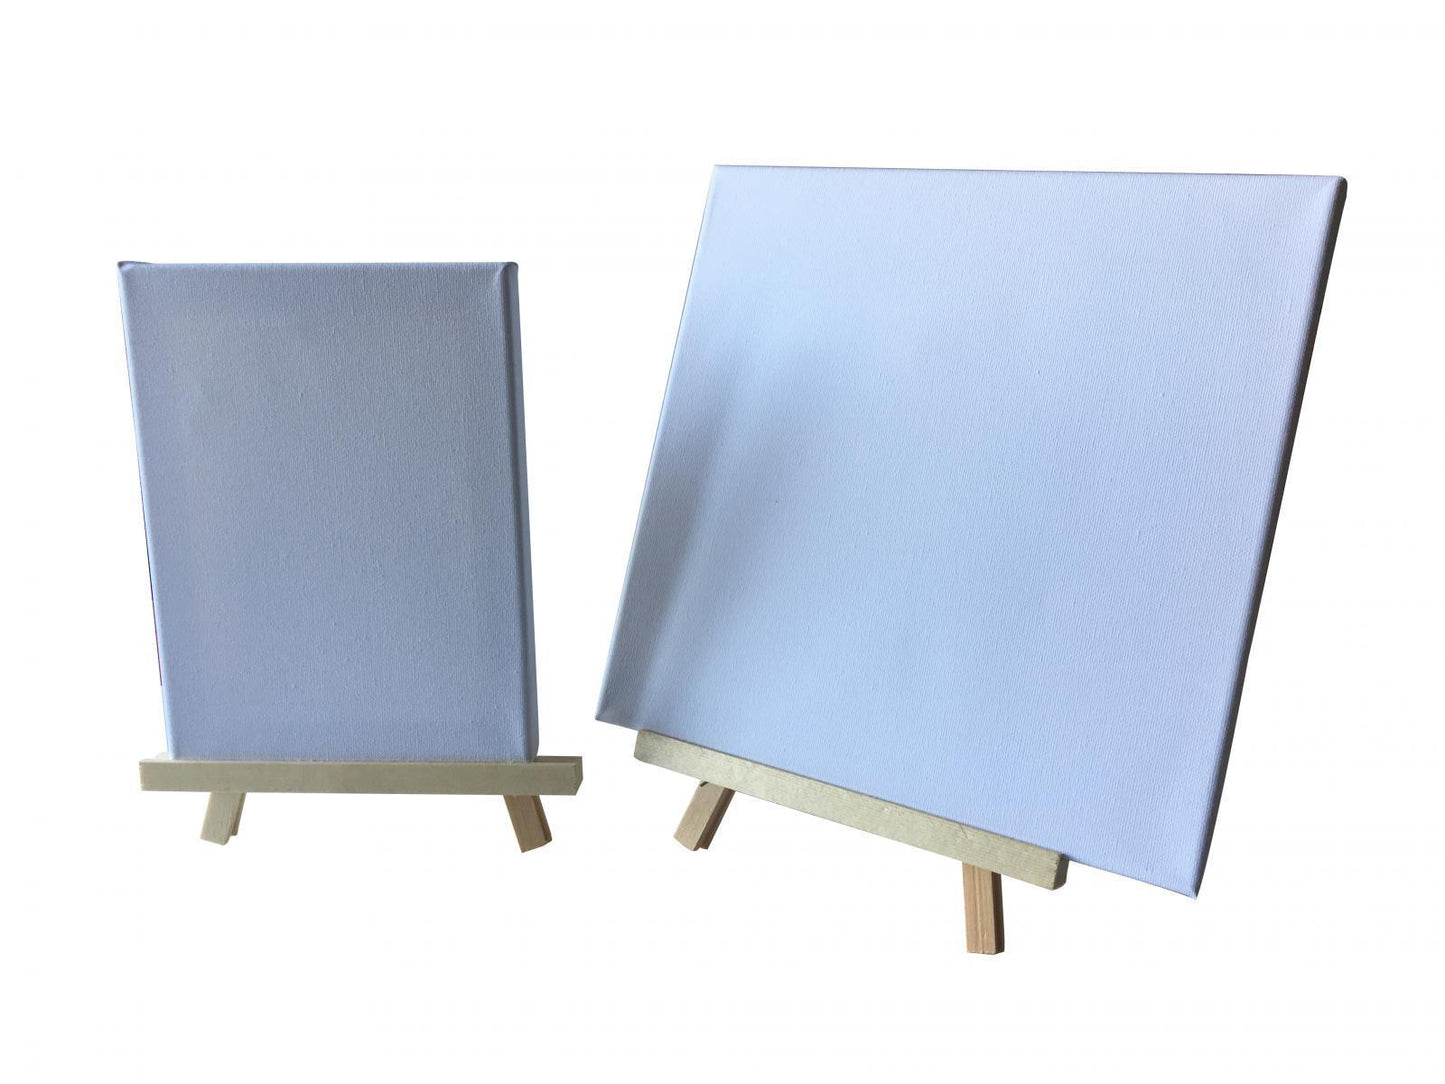 Set of 14 Assorted Sizes Blank White Stretched Board Art Frame 280gsm Canvas By Janrax